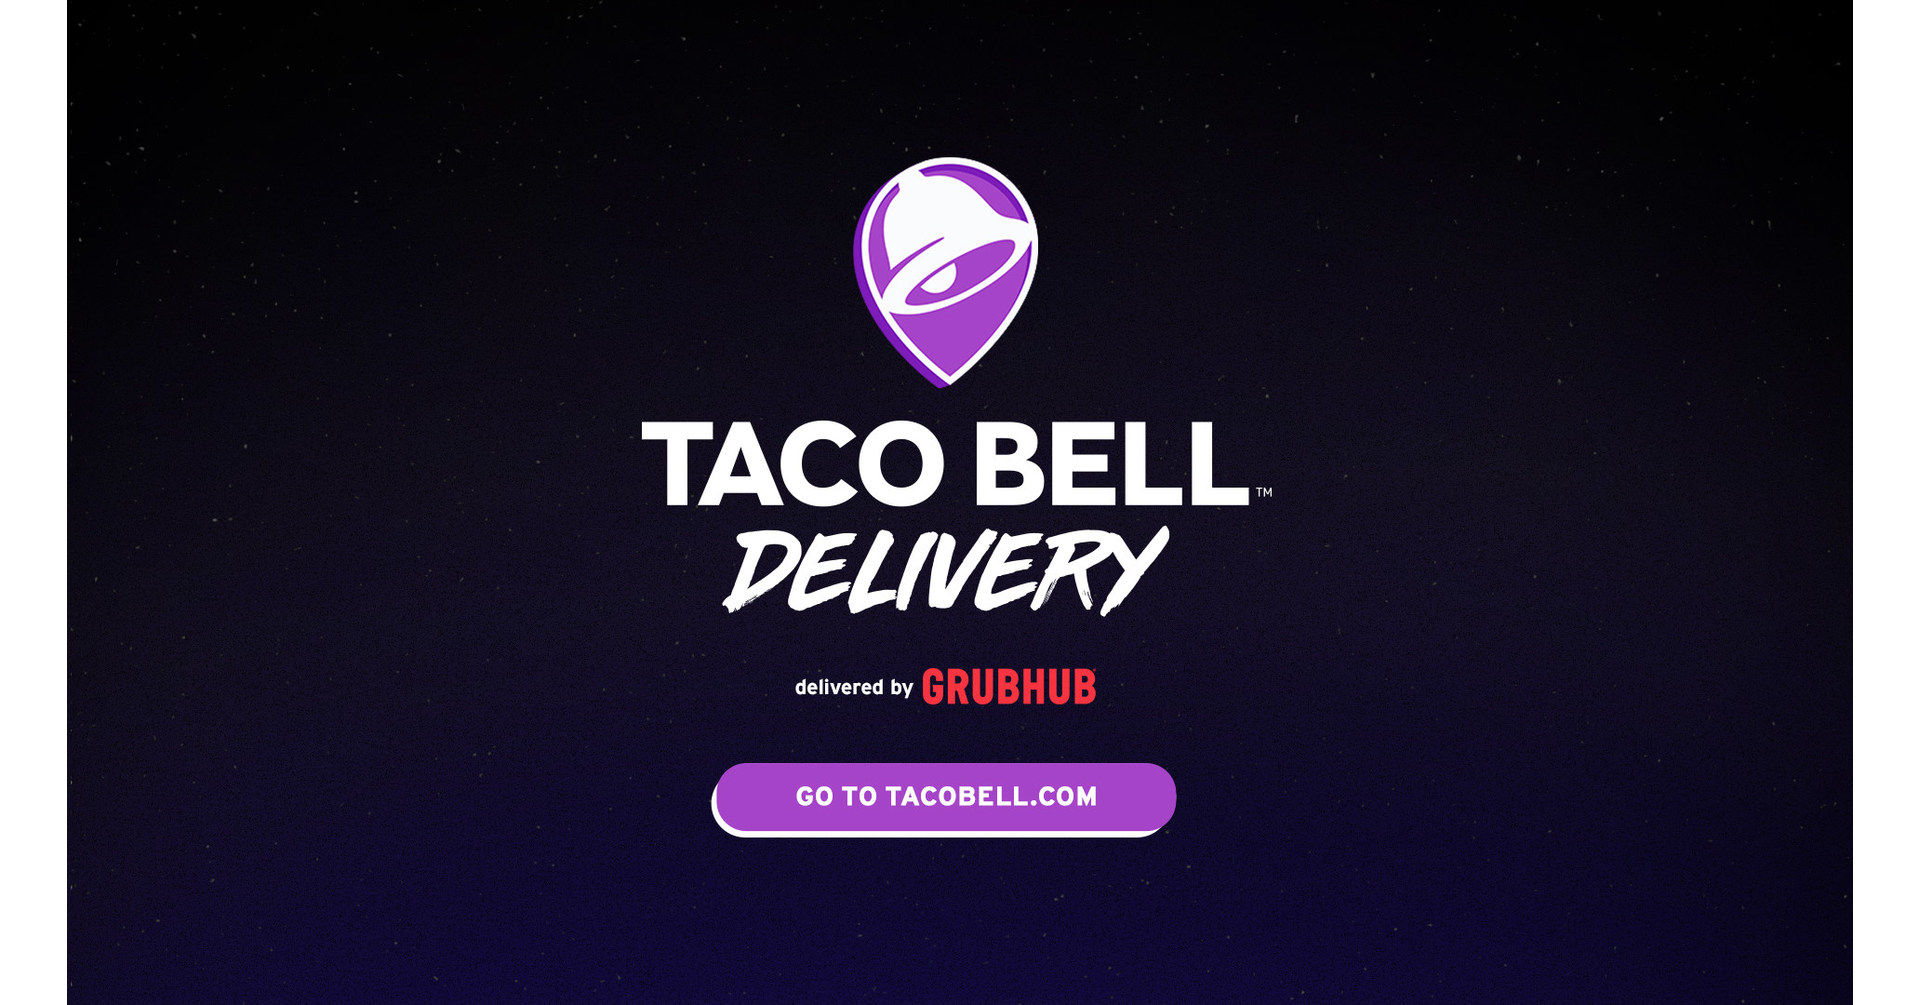 Taco bell delivery